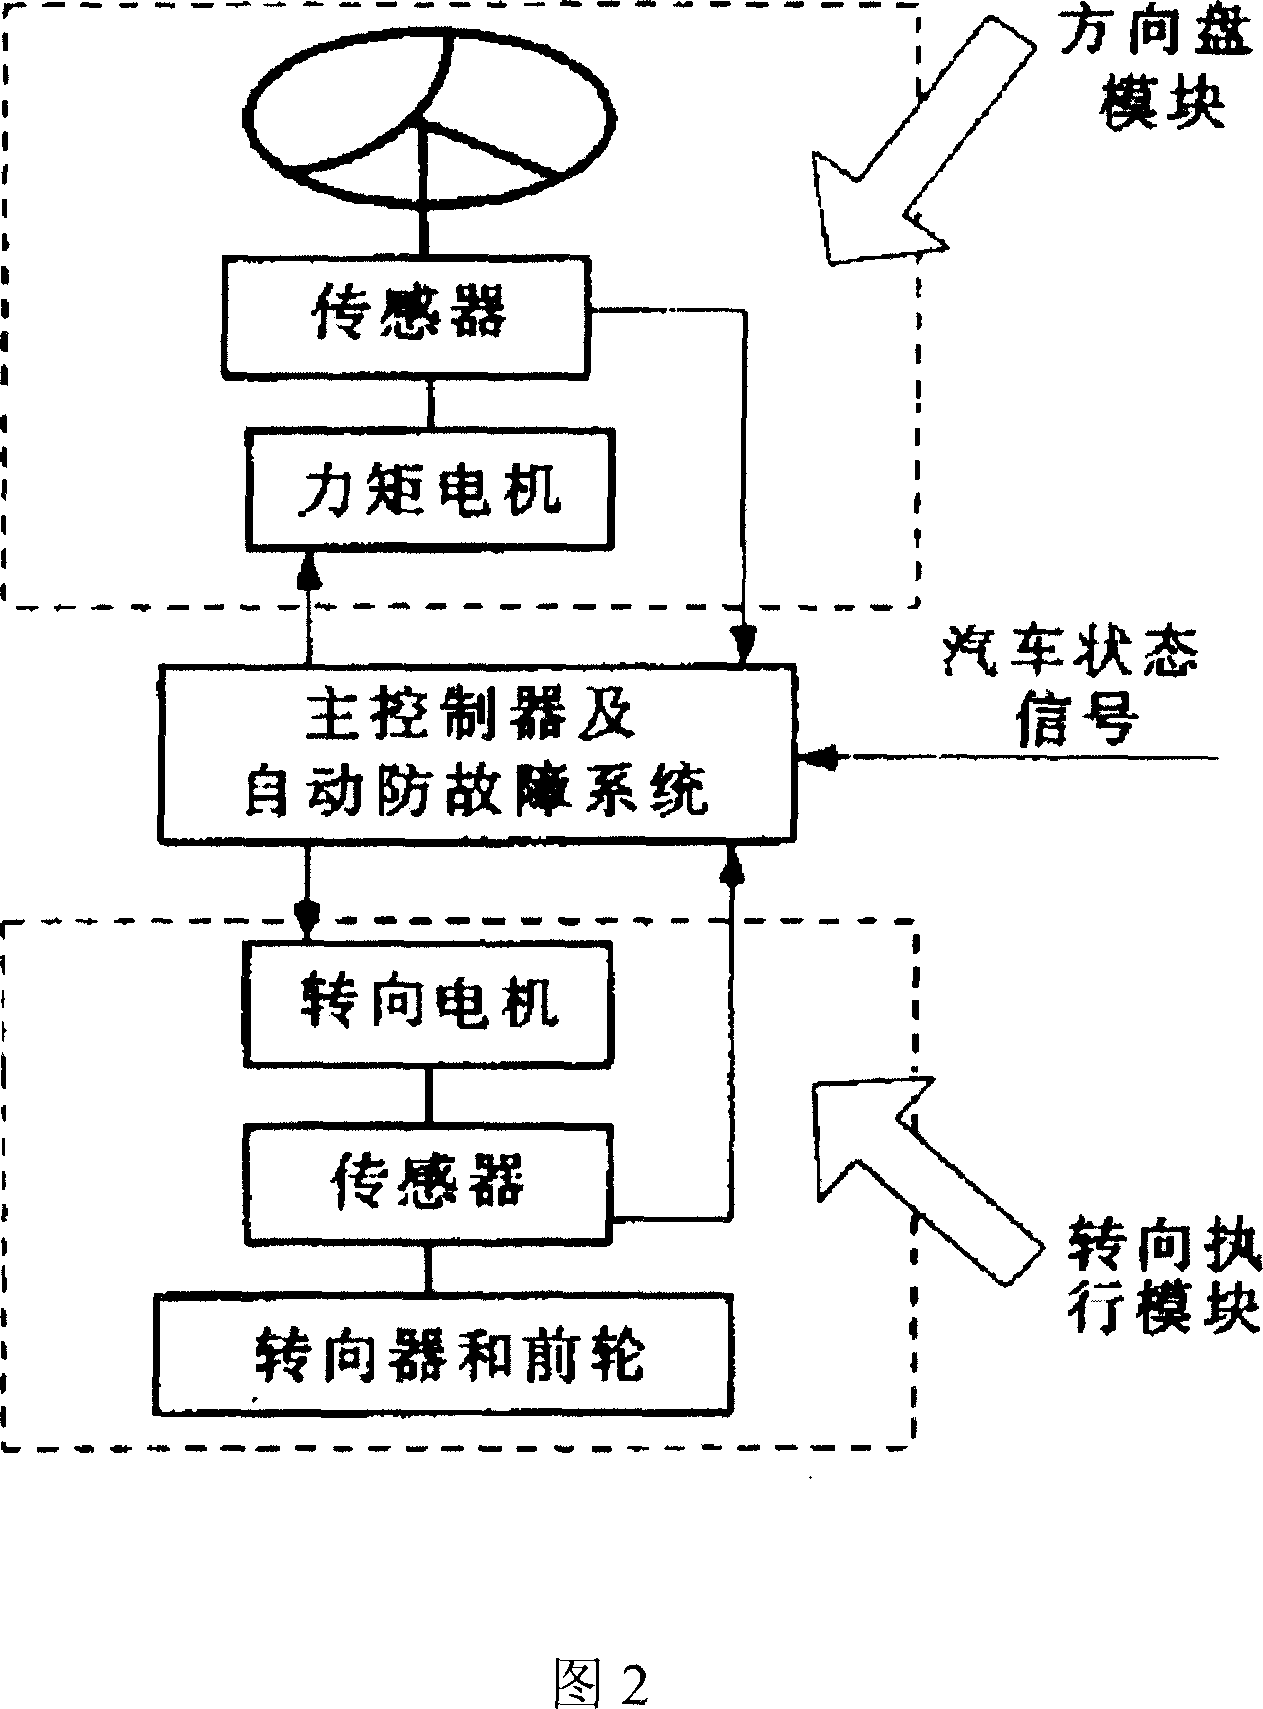 Steering device of automobile electronic steering system